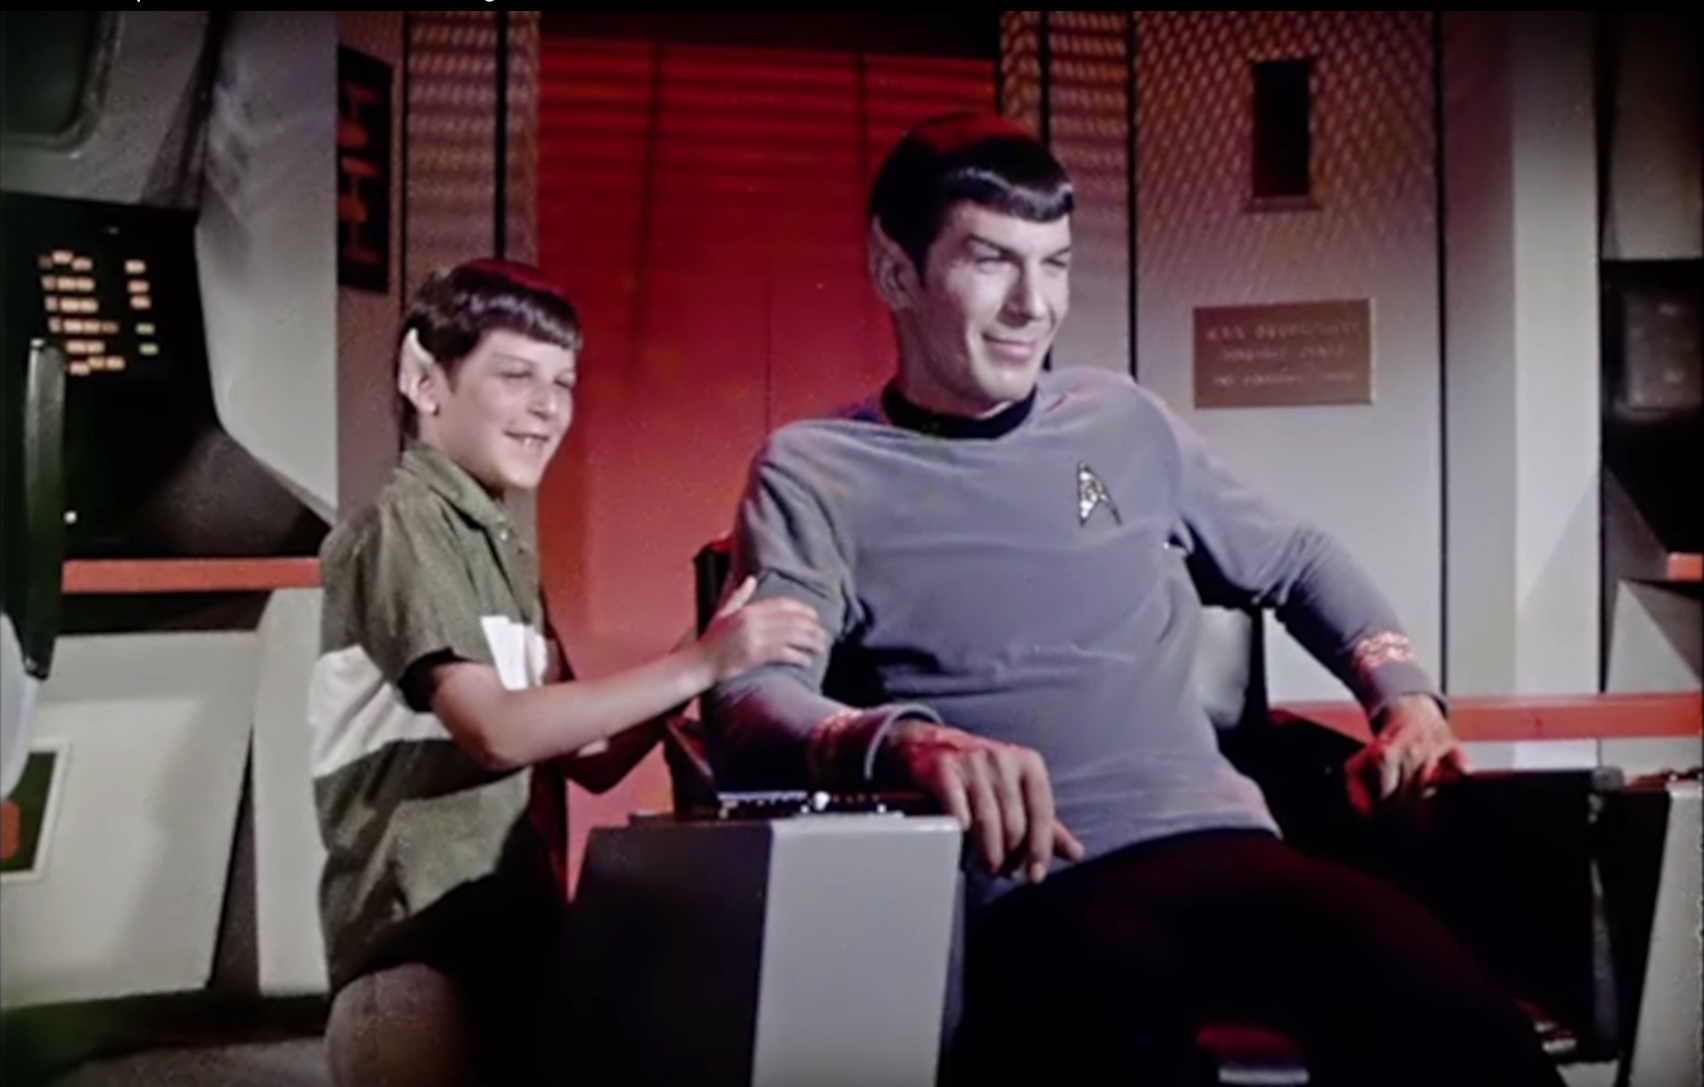 PHOTO: Leonard Nimoy and his son Adam Nimoy are seen on the set of "Star Trek" in this undated file photo. 